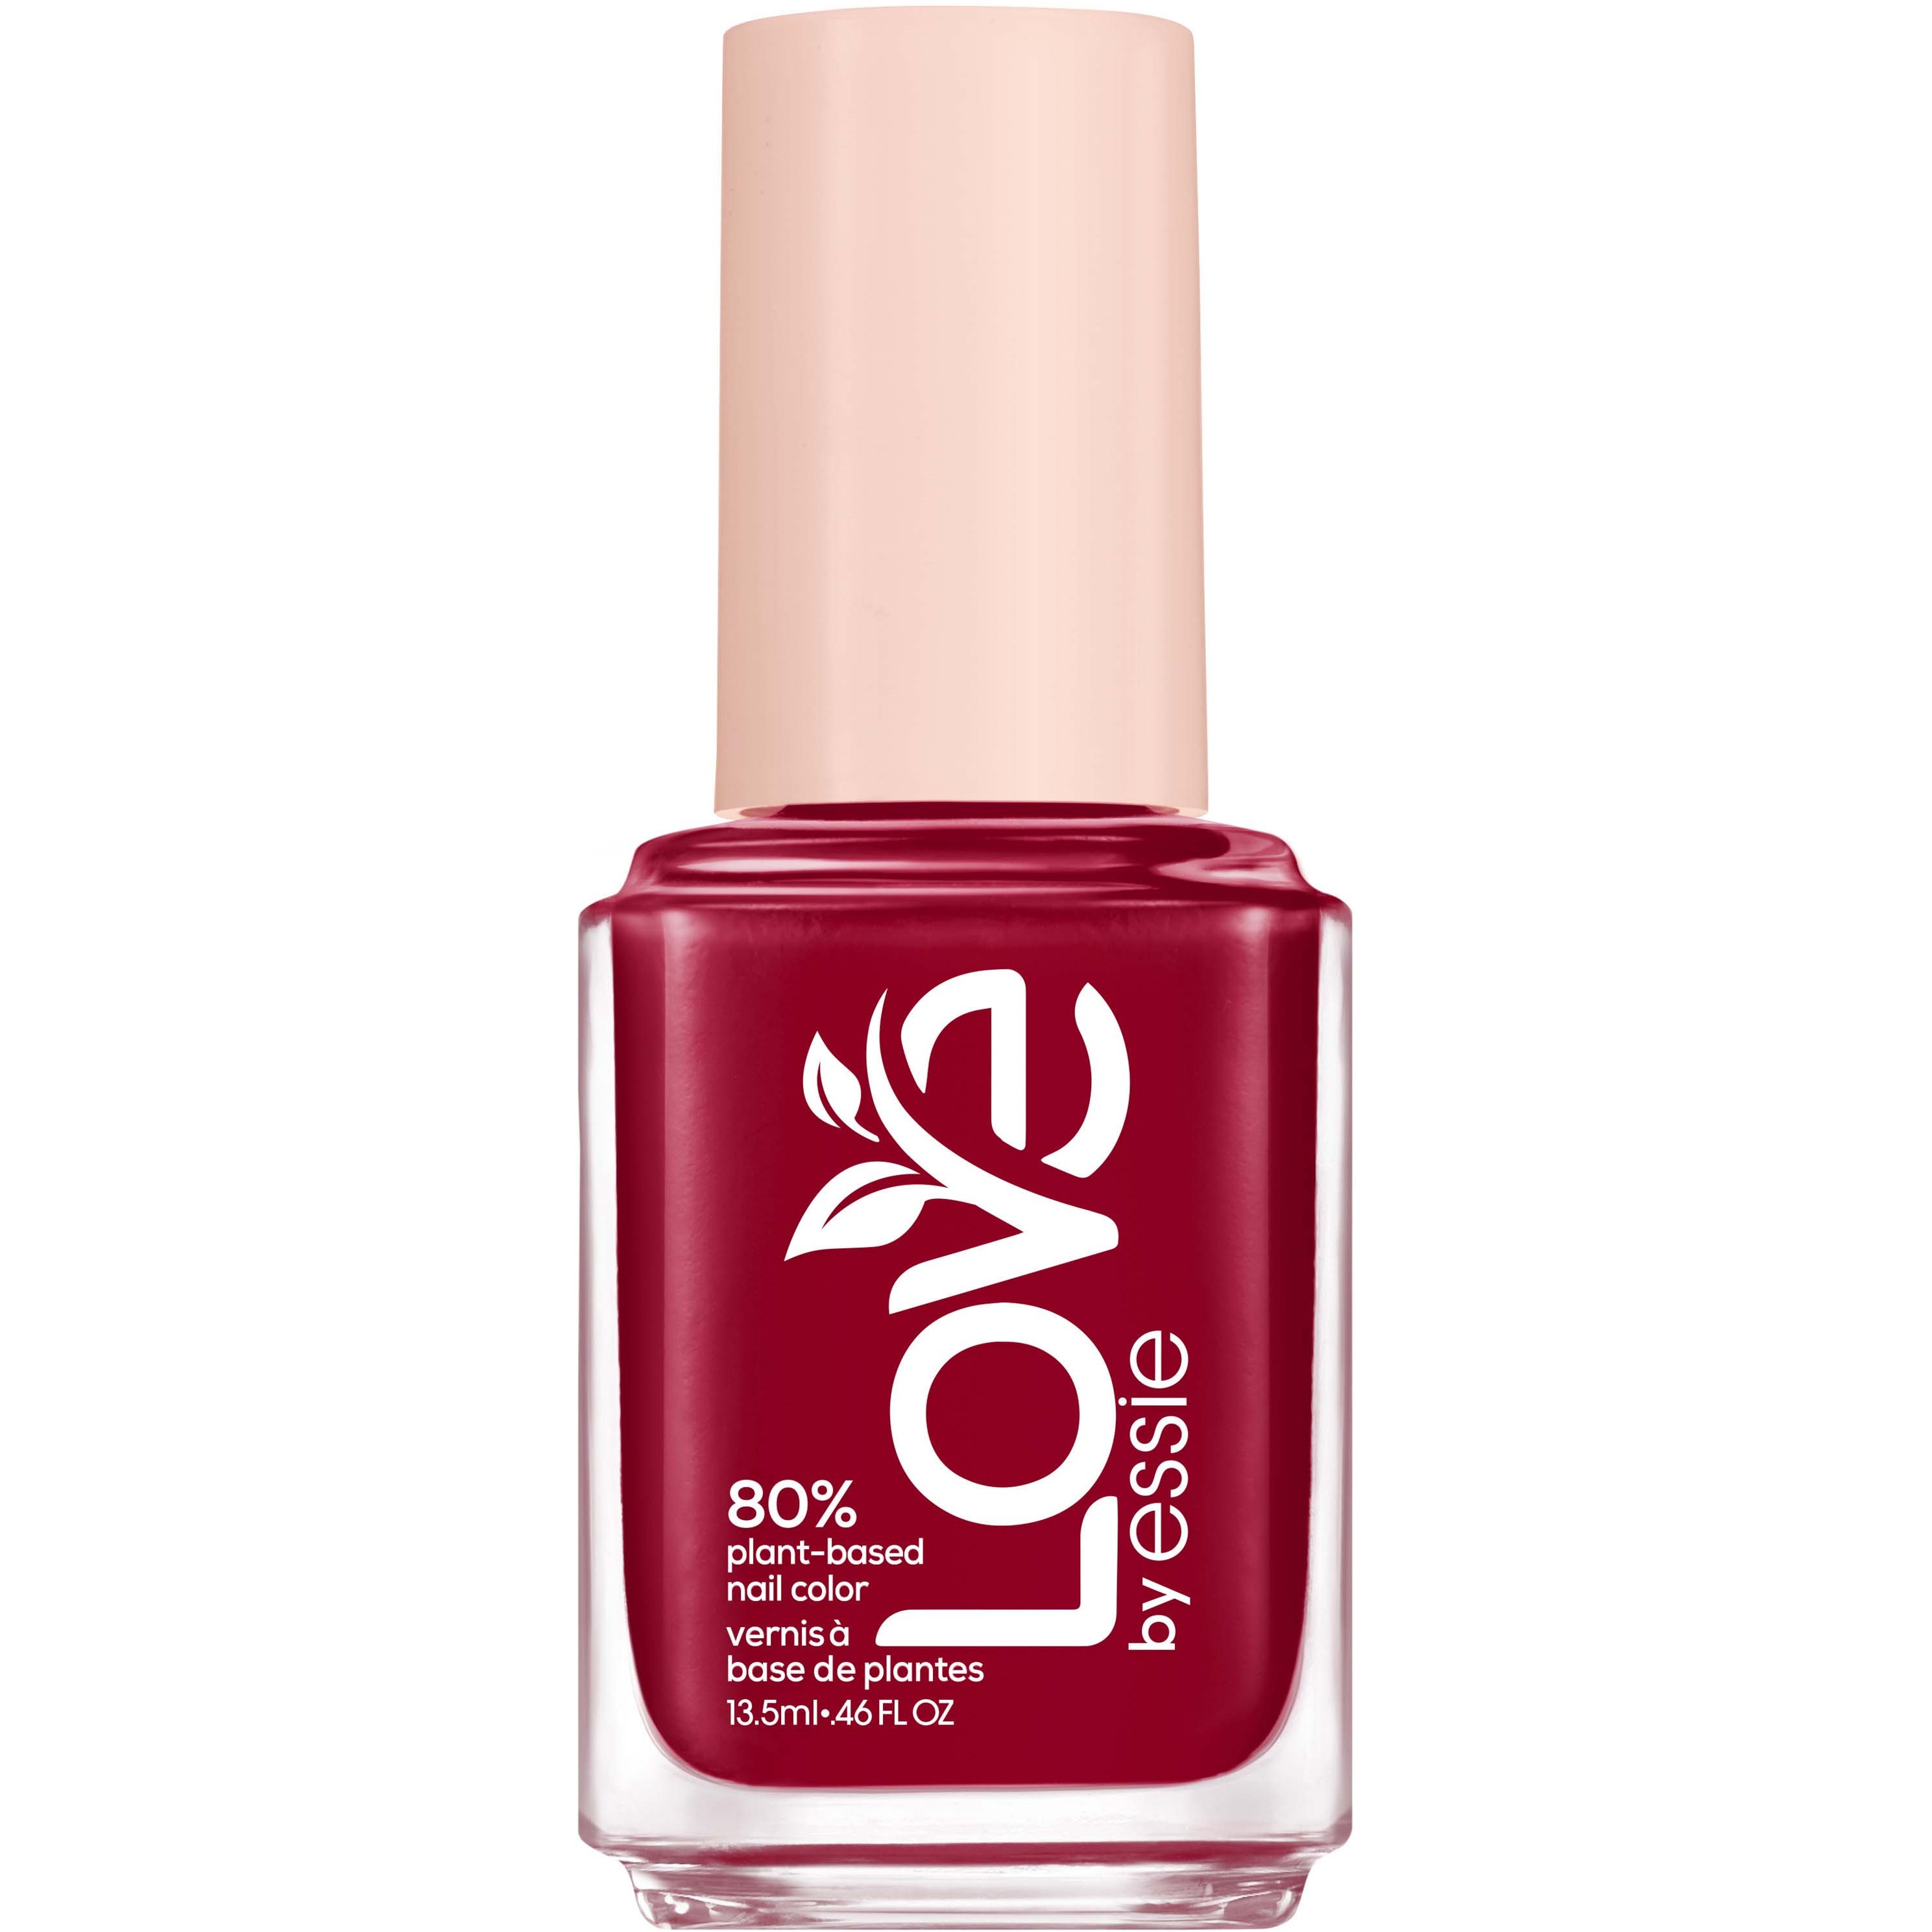 Bilde av Essie Love By Essie 80% Plant-based Nail Color 120 I Am The Moment